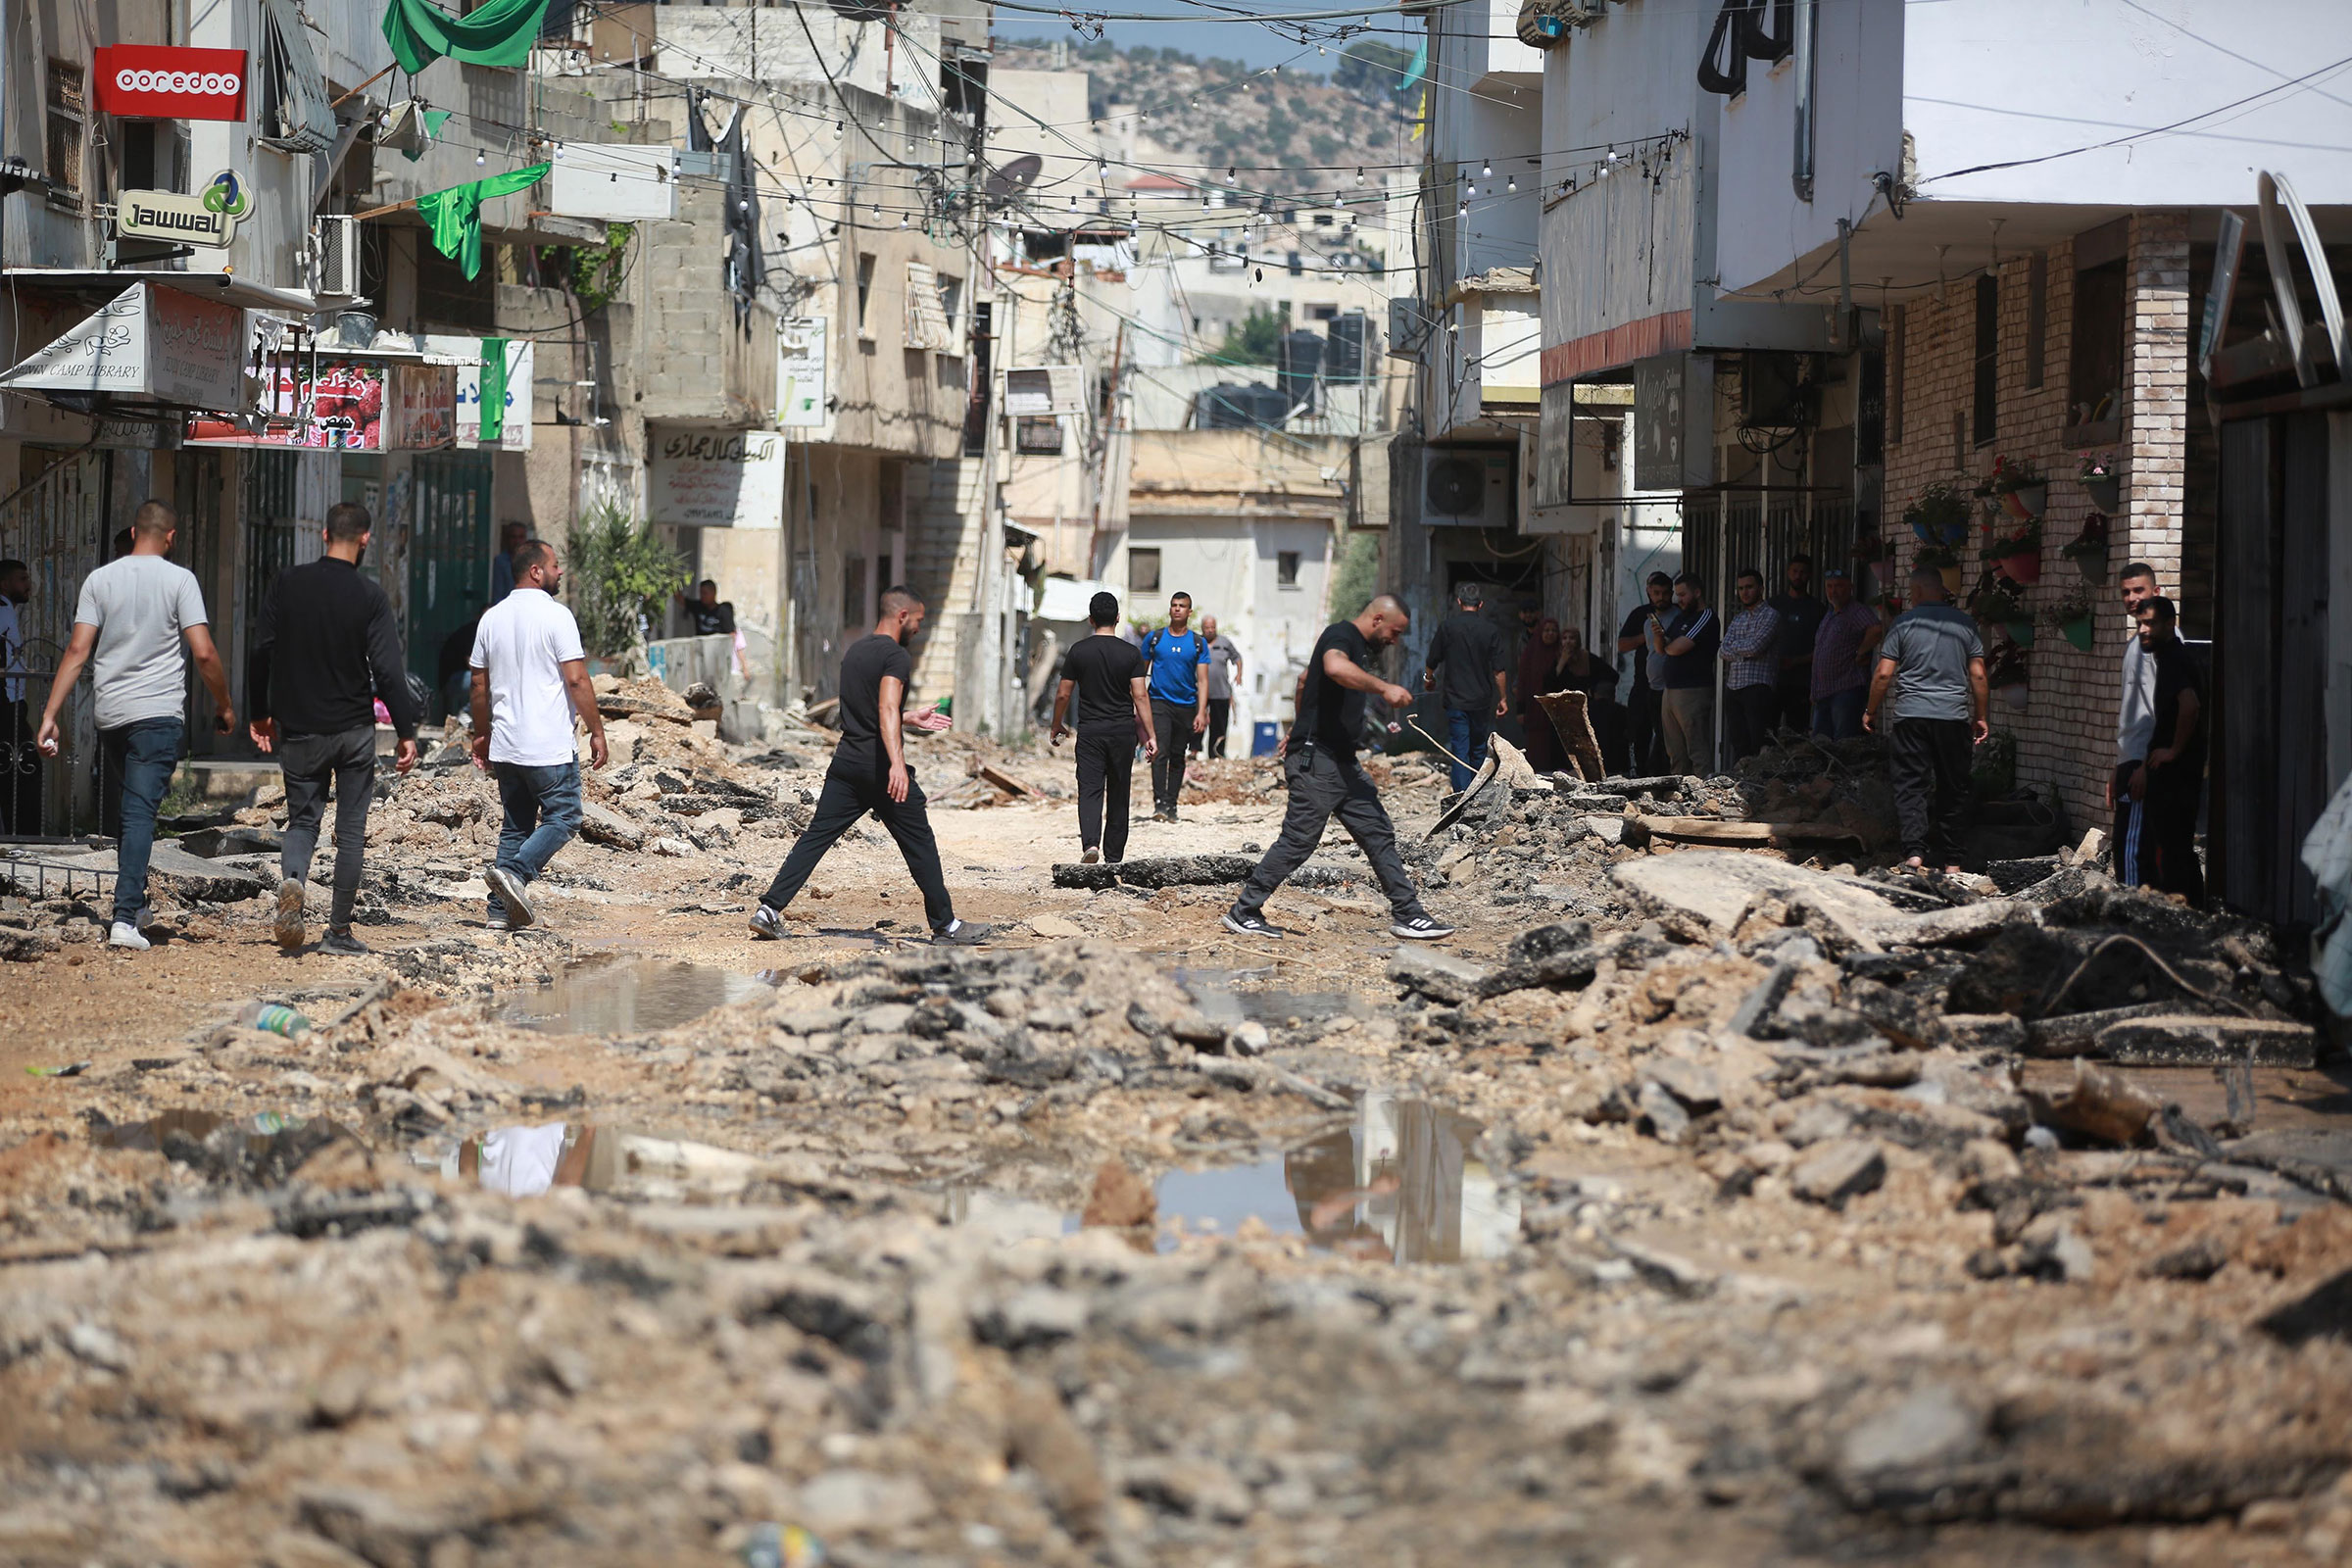 People walk through the rubble that was once a residential street